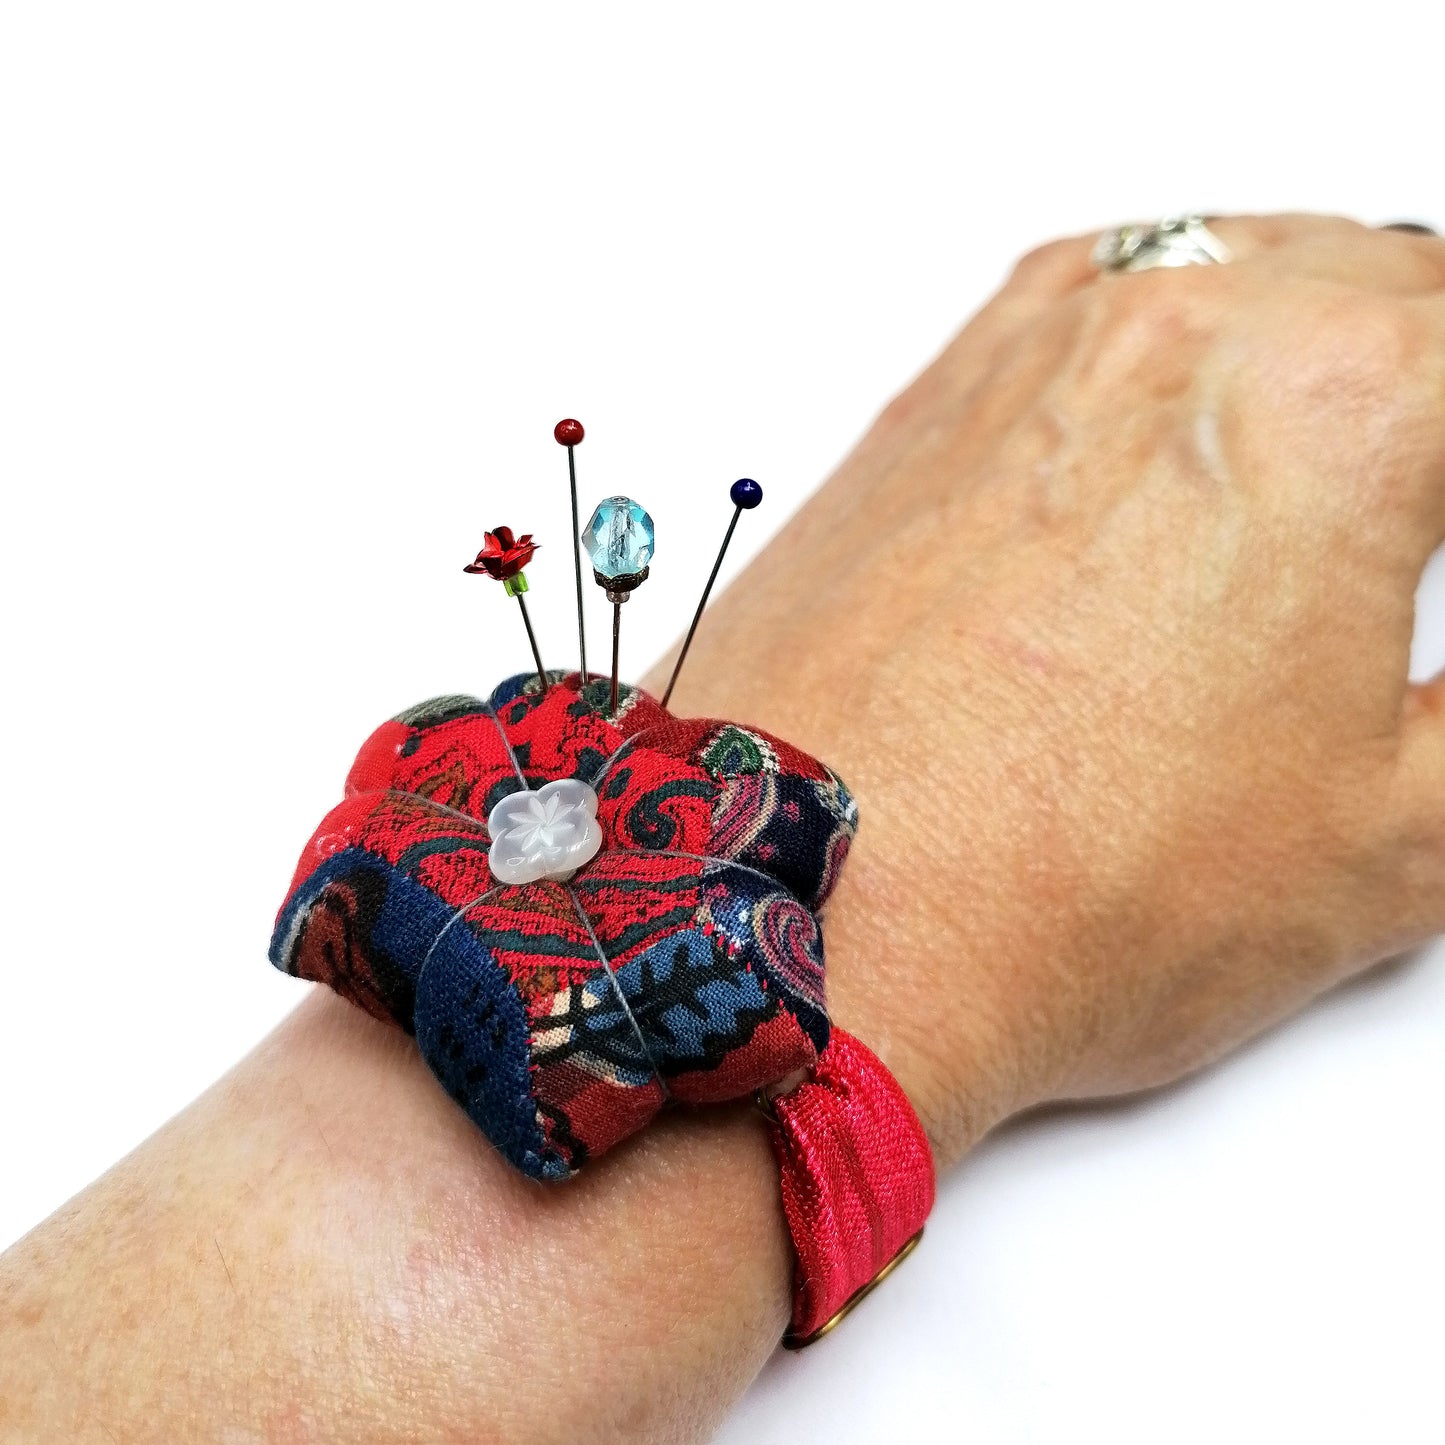 Wrist Pin Cushion - Patchwork Hexagon Collection